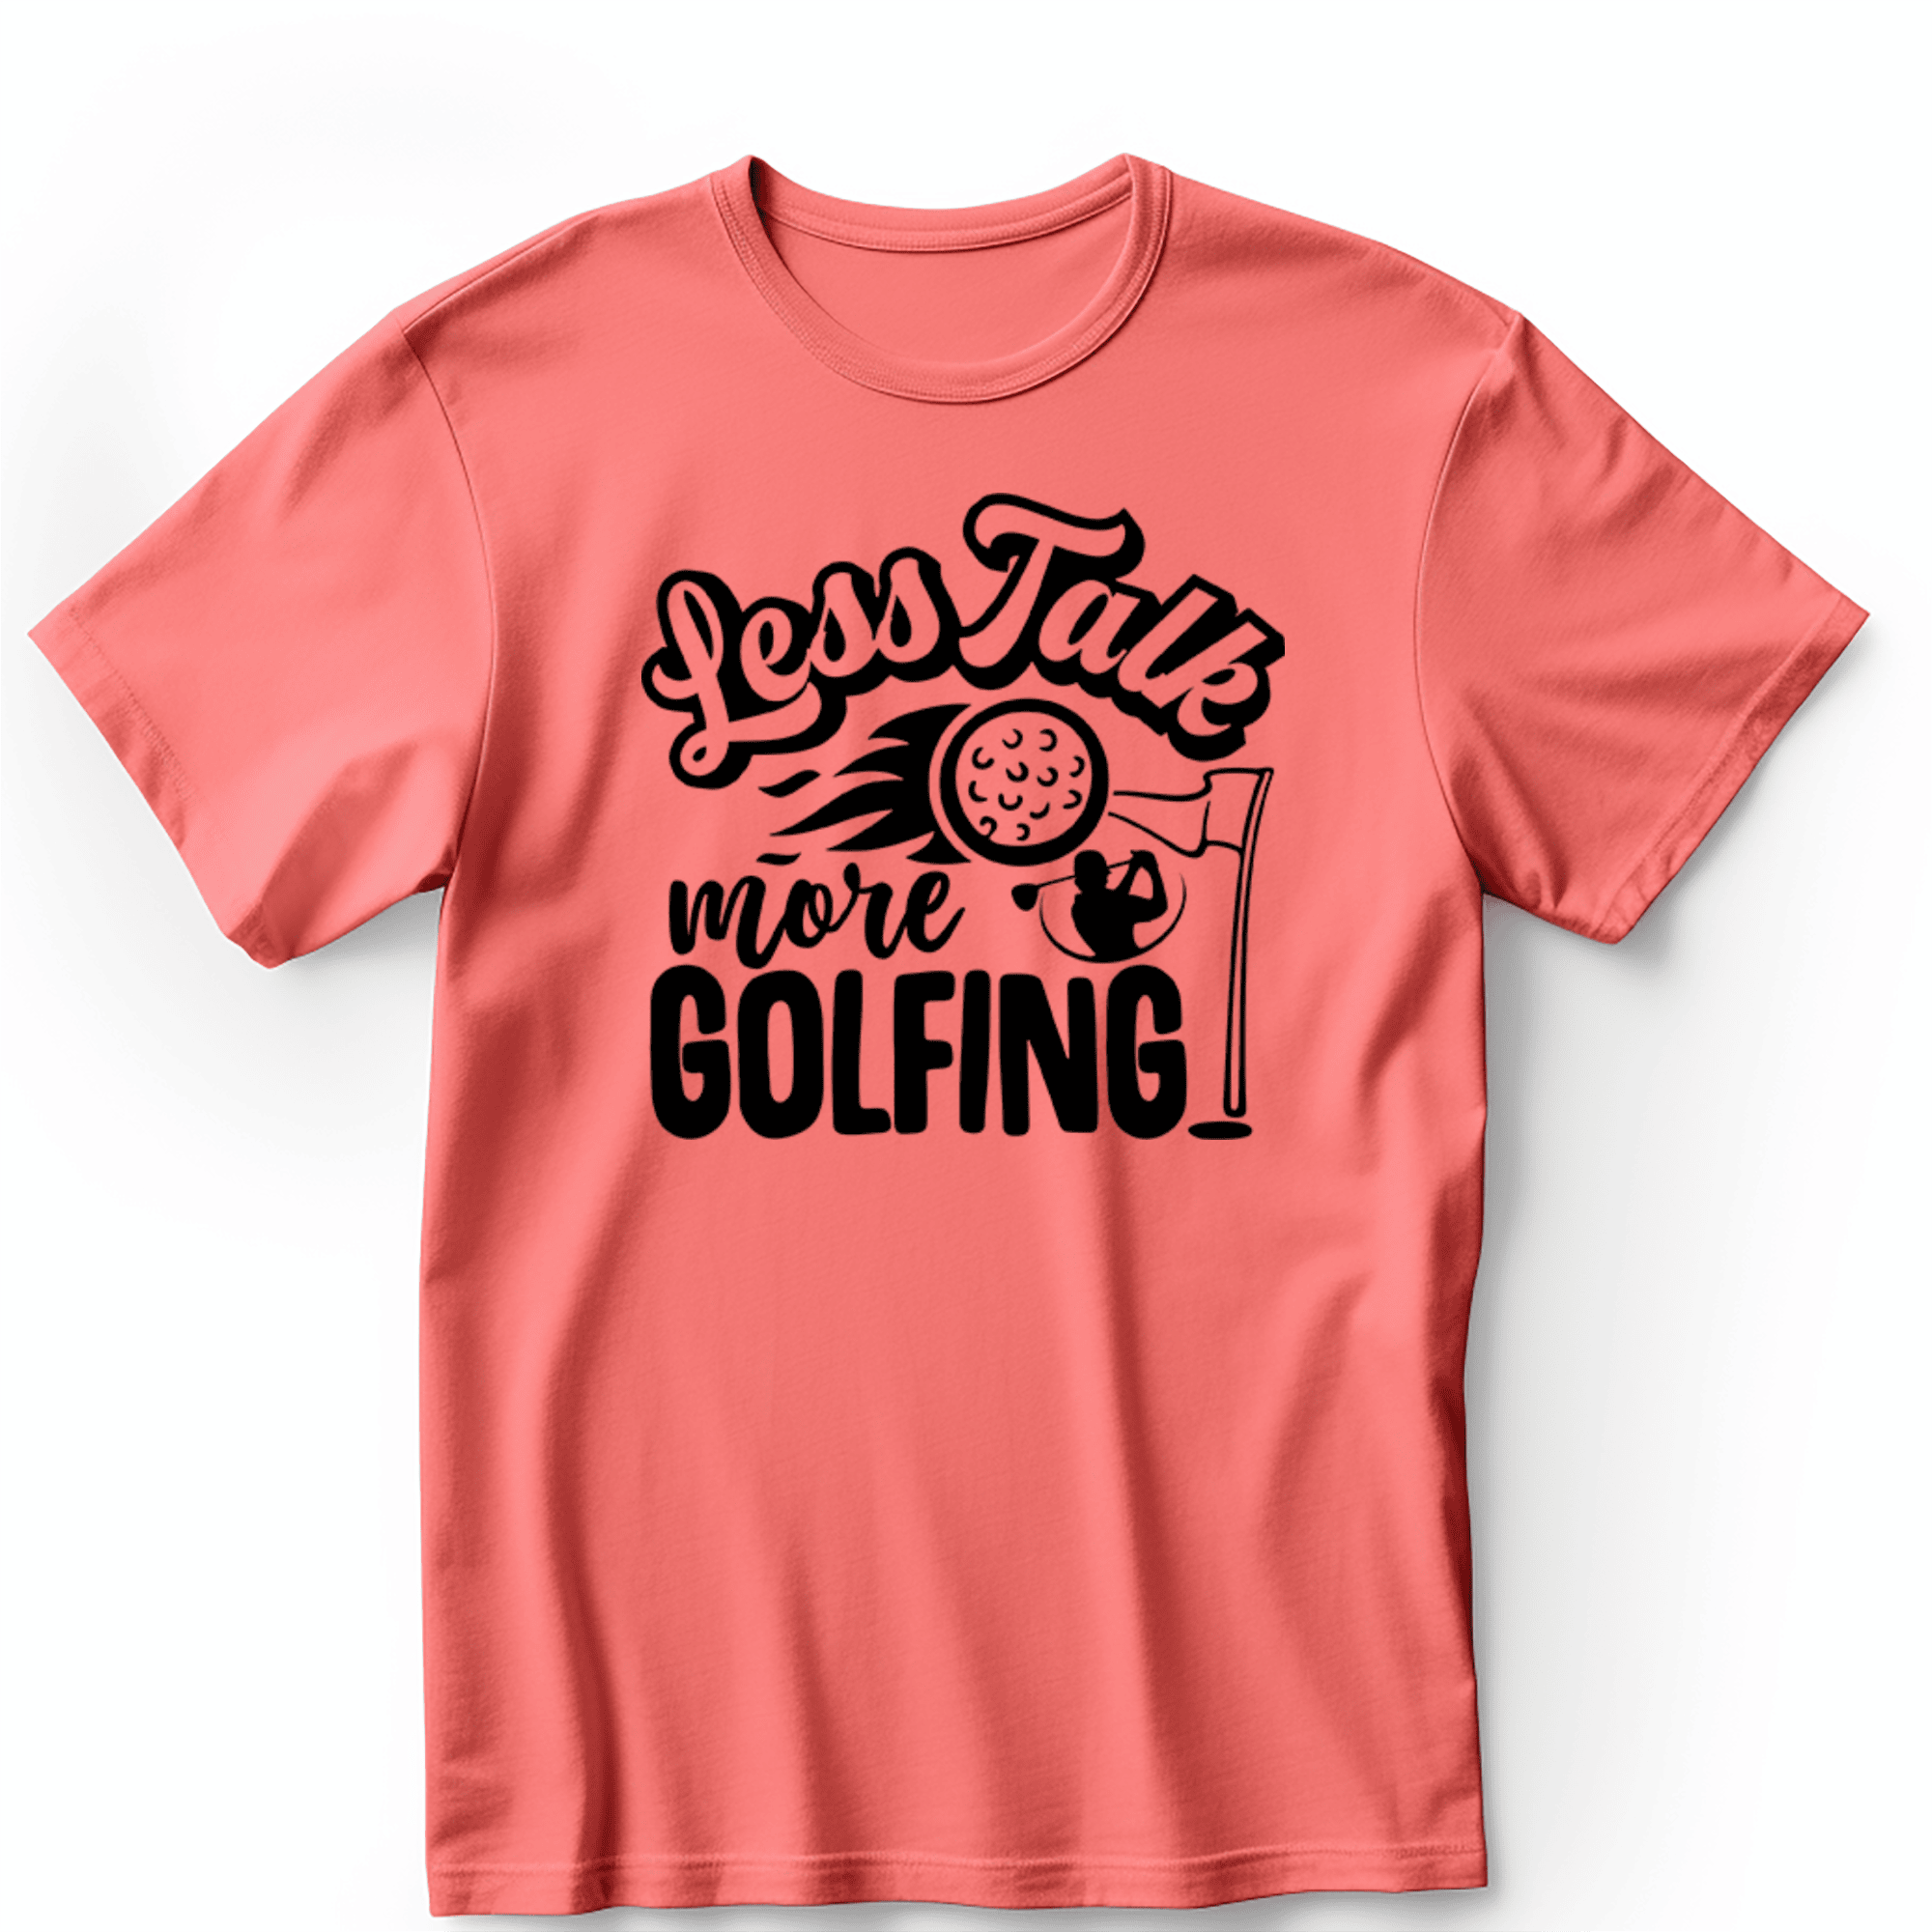 Light Red Mens T-Shirt With Less Talk More Golf Design